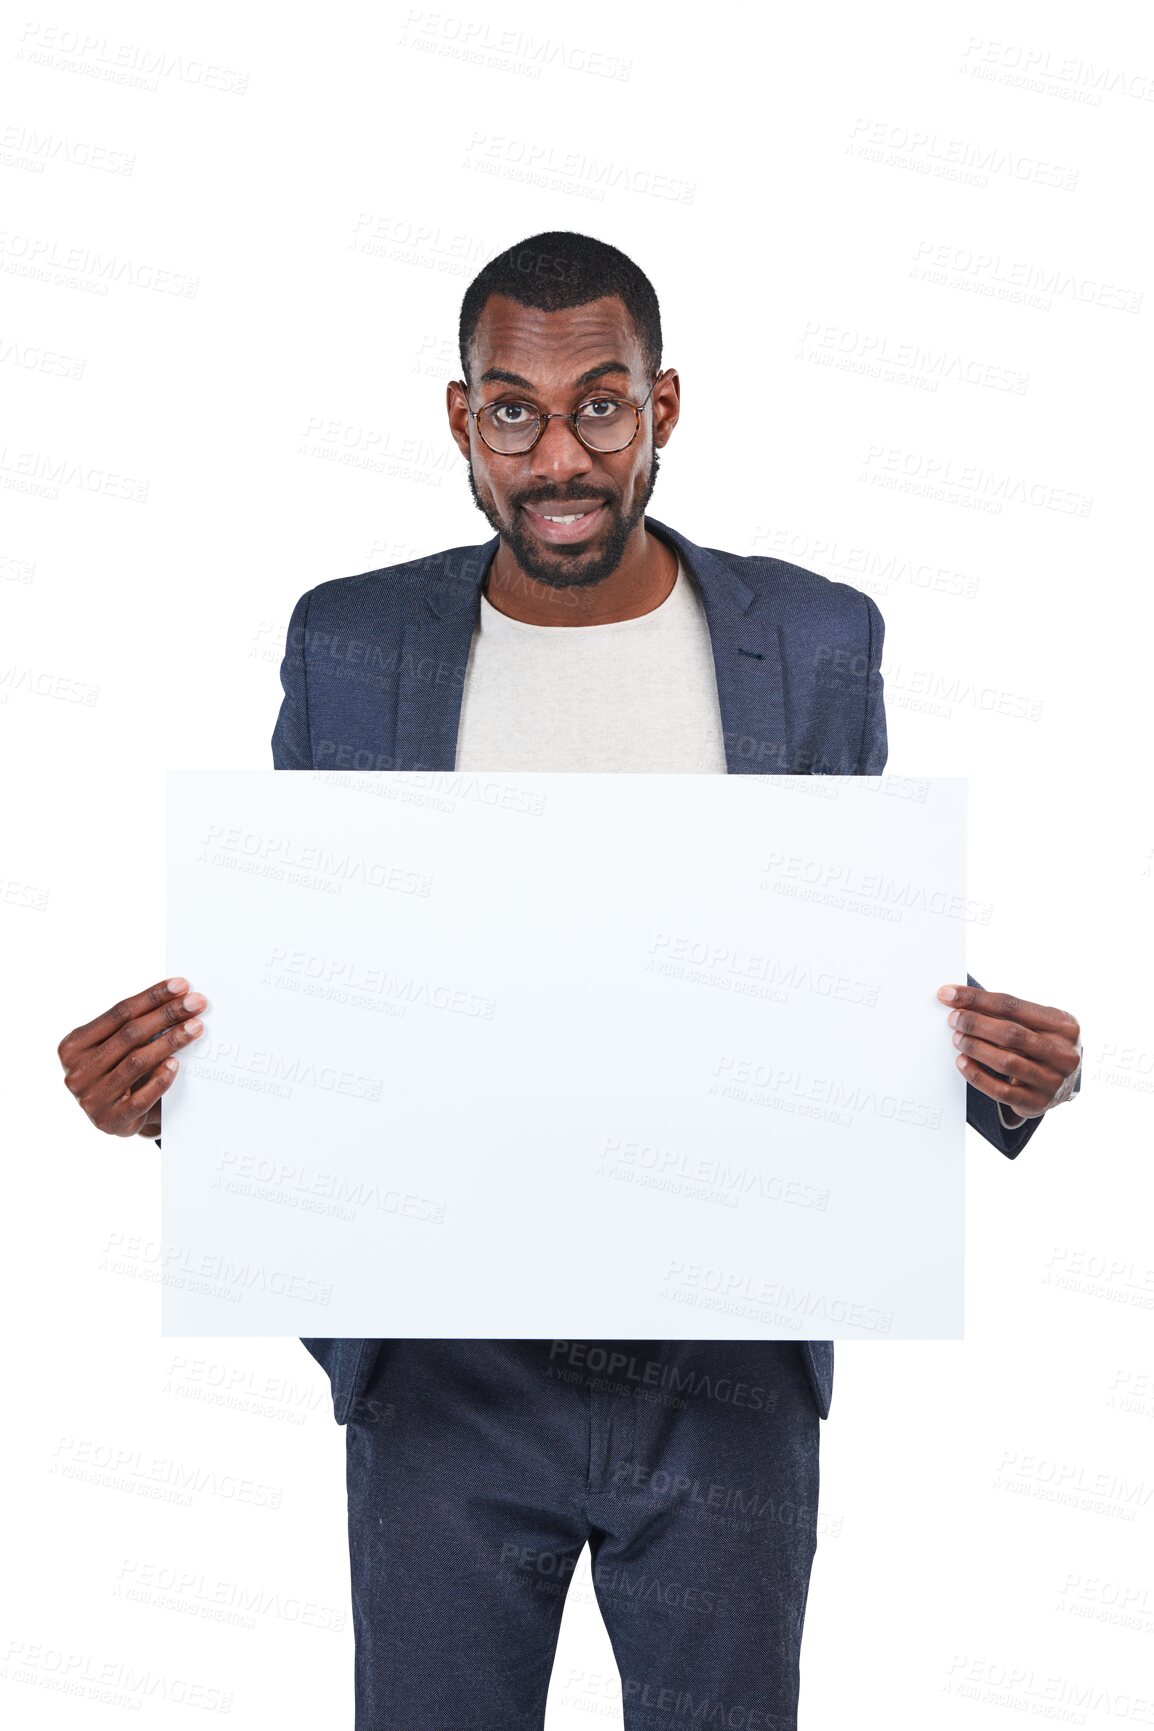 Buy stock photo Portrait, black man and poster mockup space isolated on a transparent, png background. Male business person show banner, billboard or blank paper for advertising promotion,  logo or brand opportunity